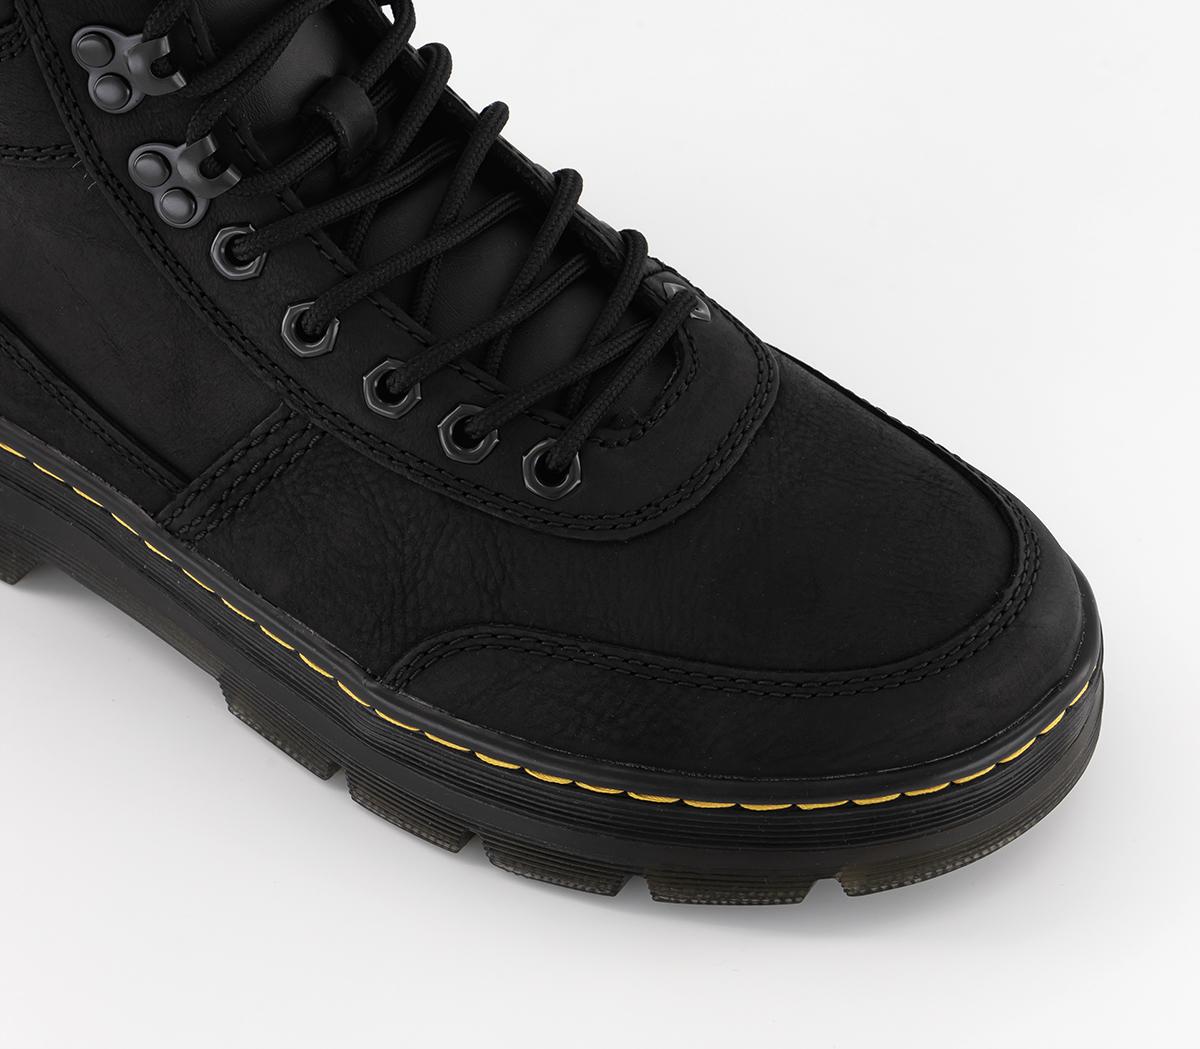 Dr. Martens Combs Tech Boots Black Wyoming - Men’s Boots